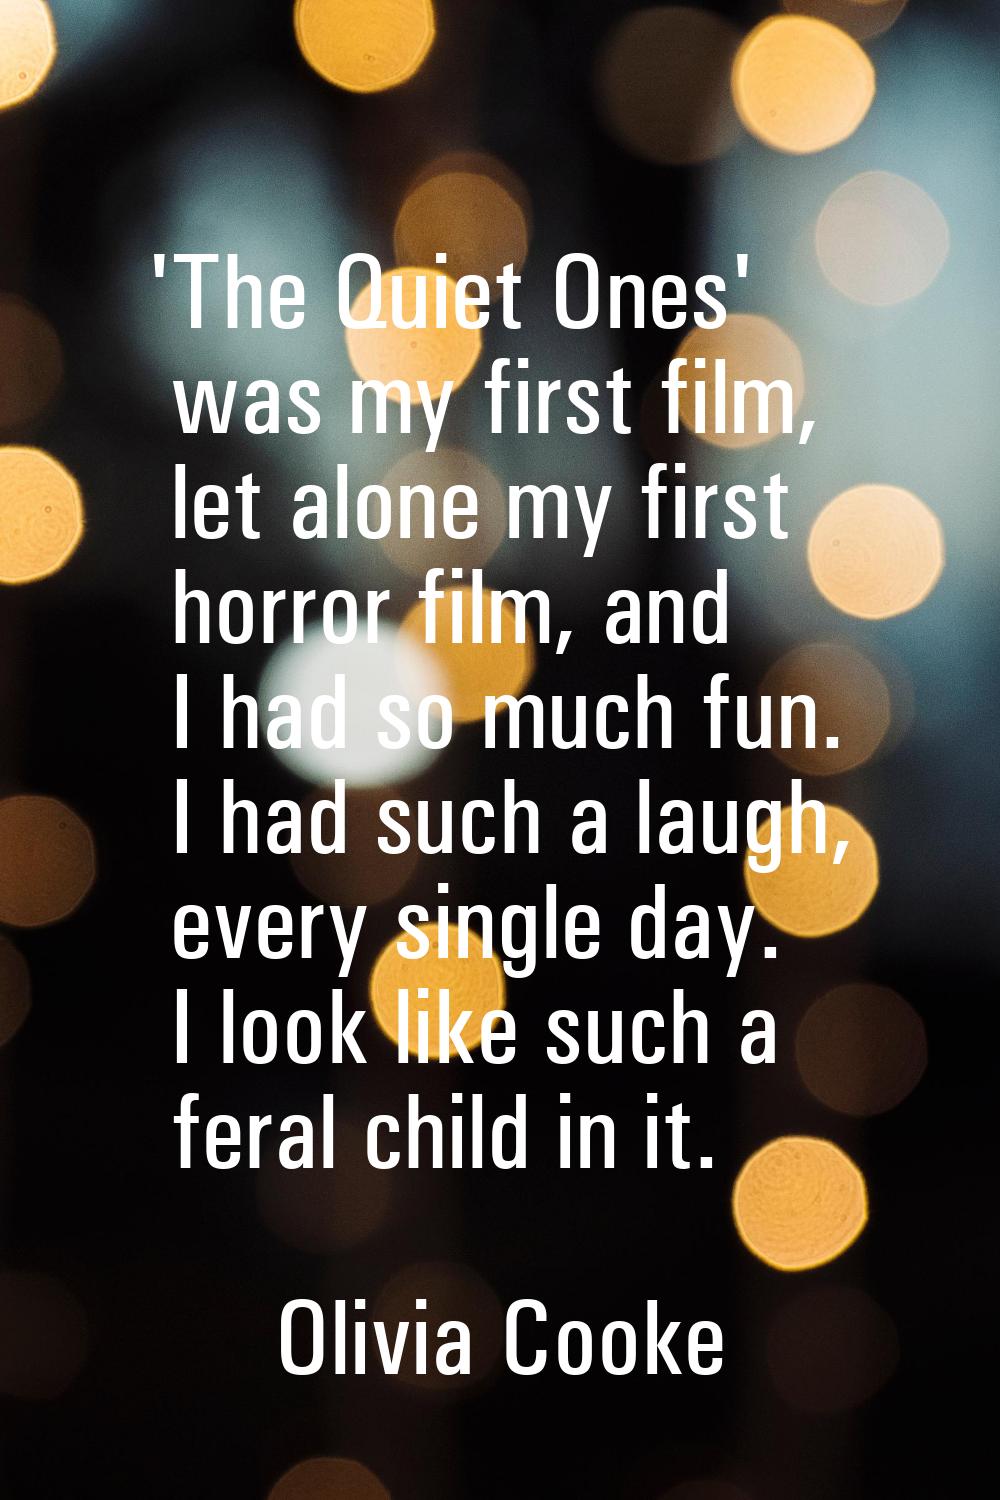 'The Quiet Ones' was my first film, let alone my first horror film, and I had so much fun. I had su